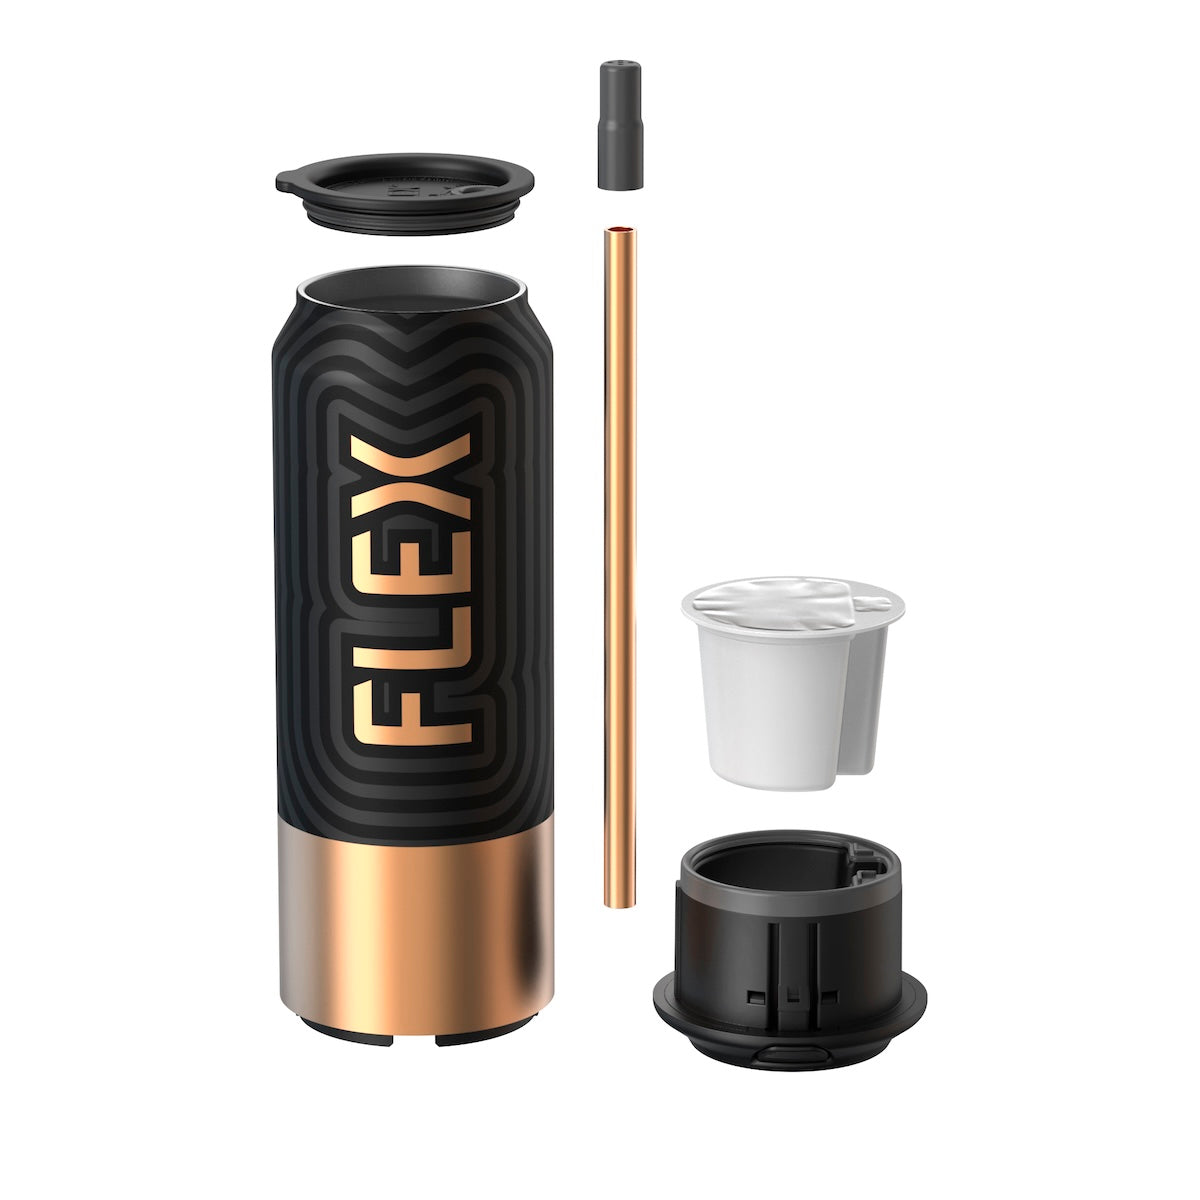 An exploded view of the FLEX Metal CAN, displaying all its components neatly laid out. The image showcases the can's black body with a bold, gold FLEX logo, a matching gold straw, a sophisticated black lid, a white FUEL Pod, and the base unit. The design indicates a seamless integration of form and function, reflecting the product's ease of use and the sleek elegance that FLEX customers can expect.